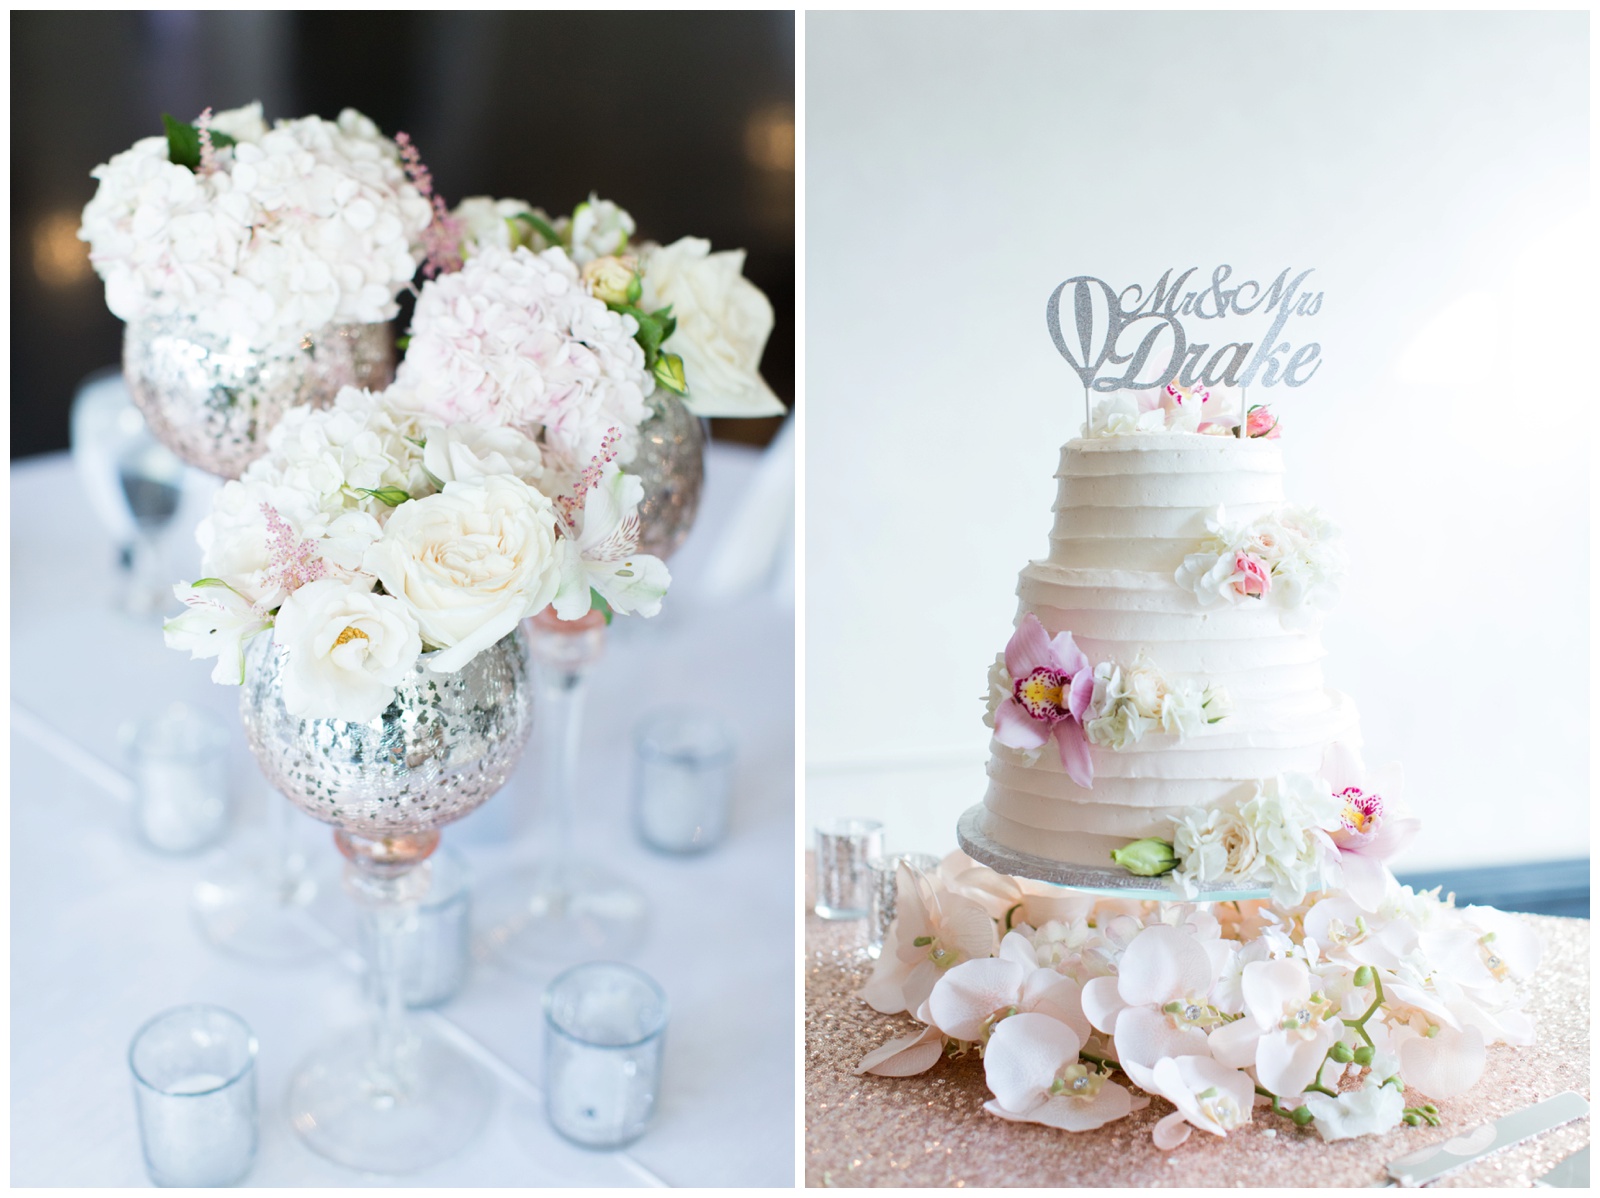 Old Hollywood style table decor and wedding cake